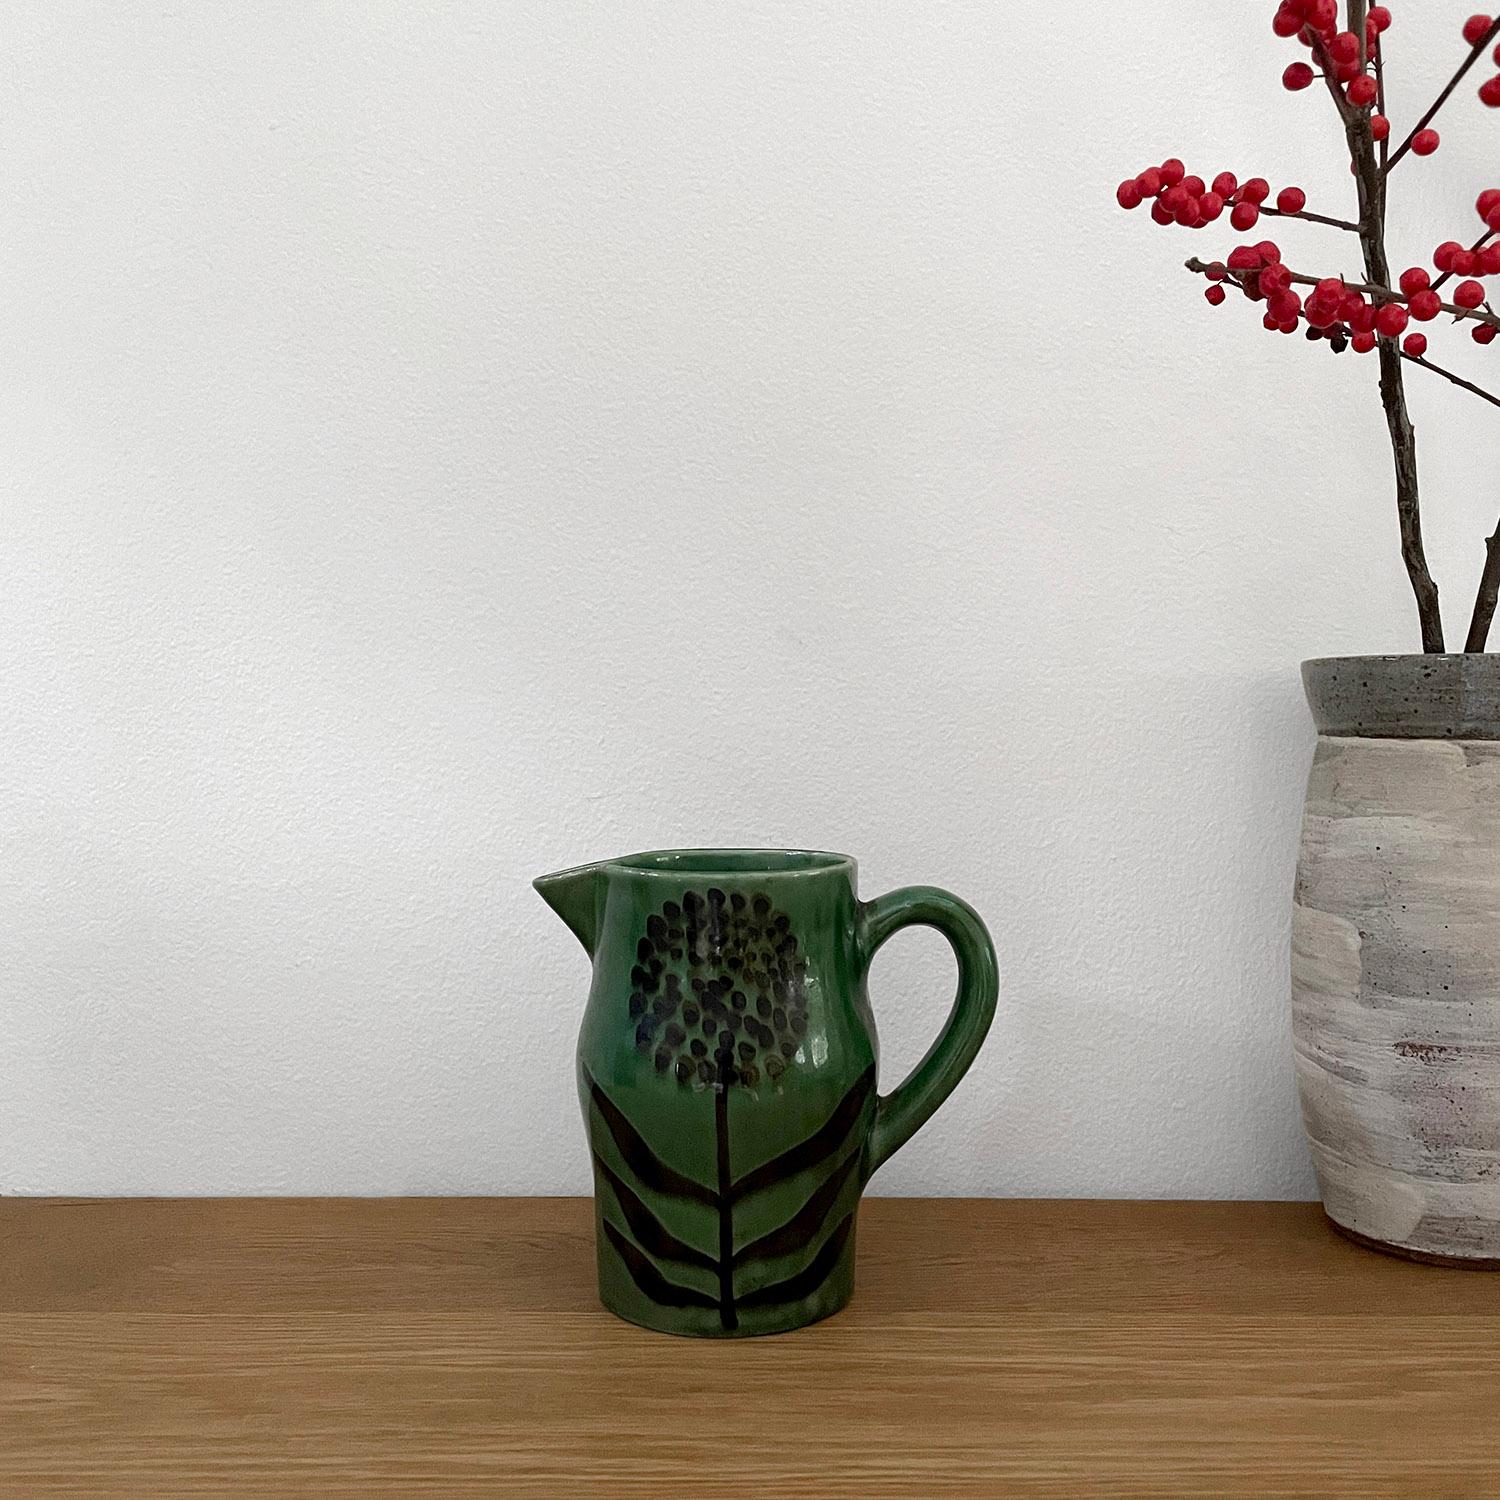 Robert Picault French ceramic pitcher vase 
France, circa 1950s 
Rich emerald green ceramic is accented with an organic floral motif
This charming piece is certain to brighten up any counter space 
Vessel has not been tested to hold water  
Patina